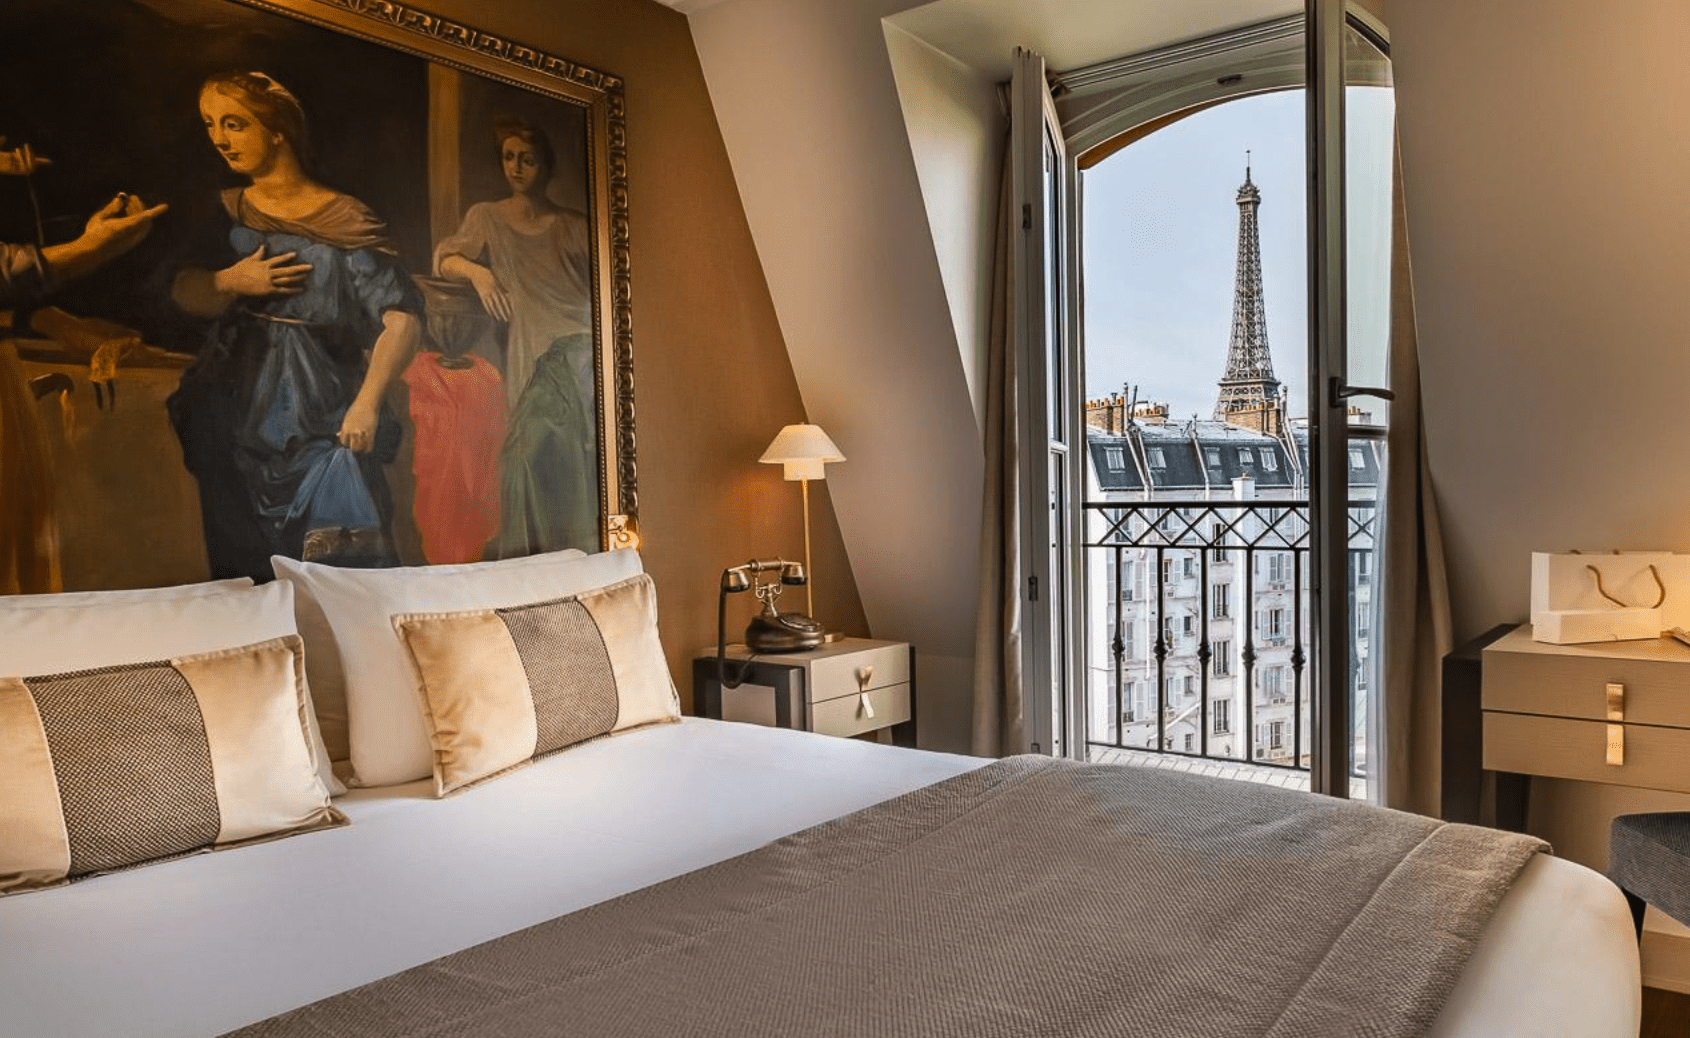 Best hotels in Paris with view of the Eiffel Tower - four star - Hotel Le Walt Room Interior